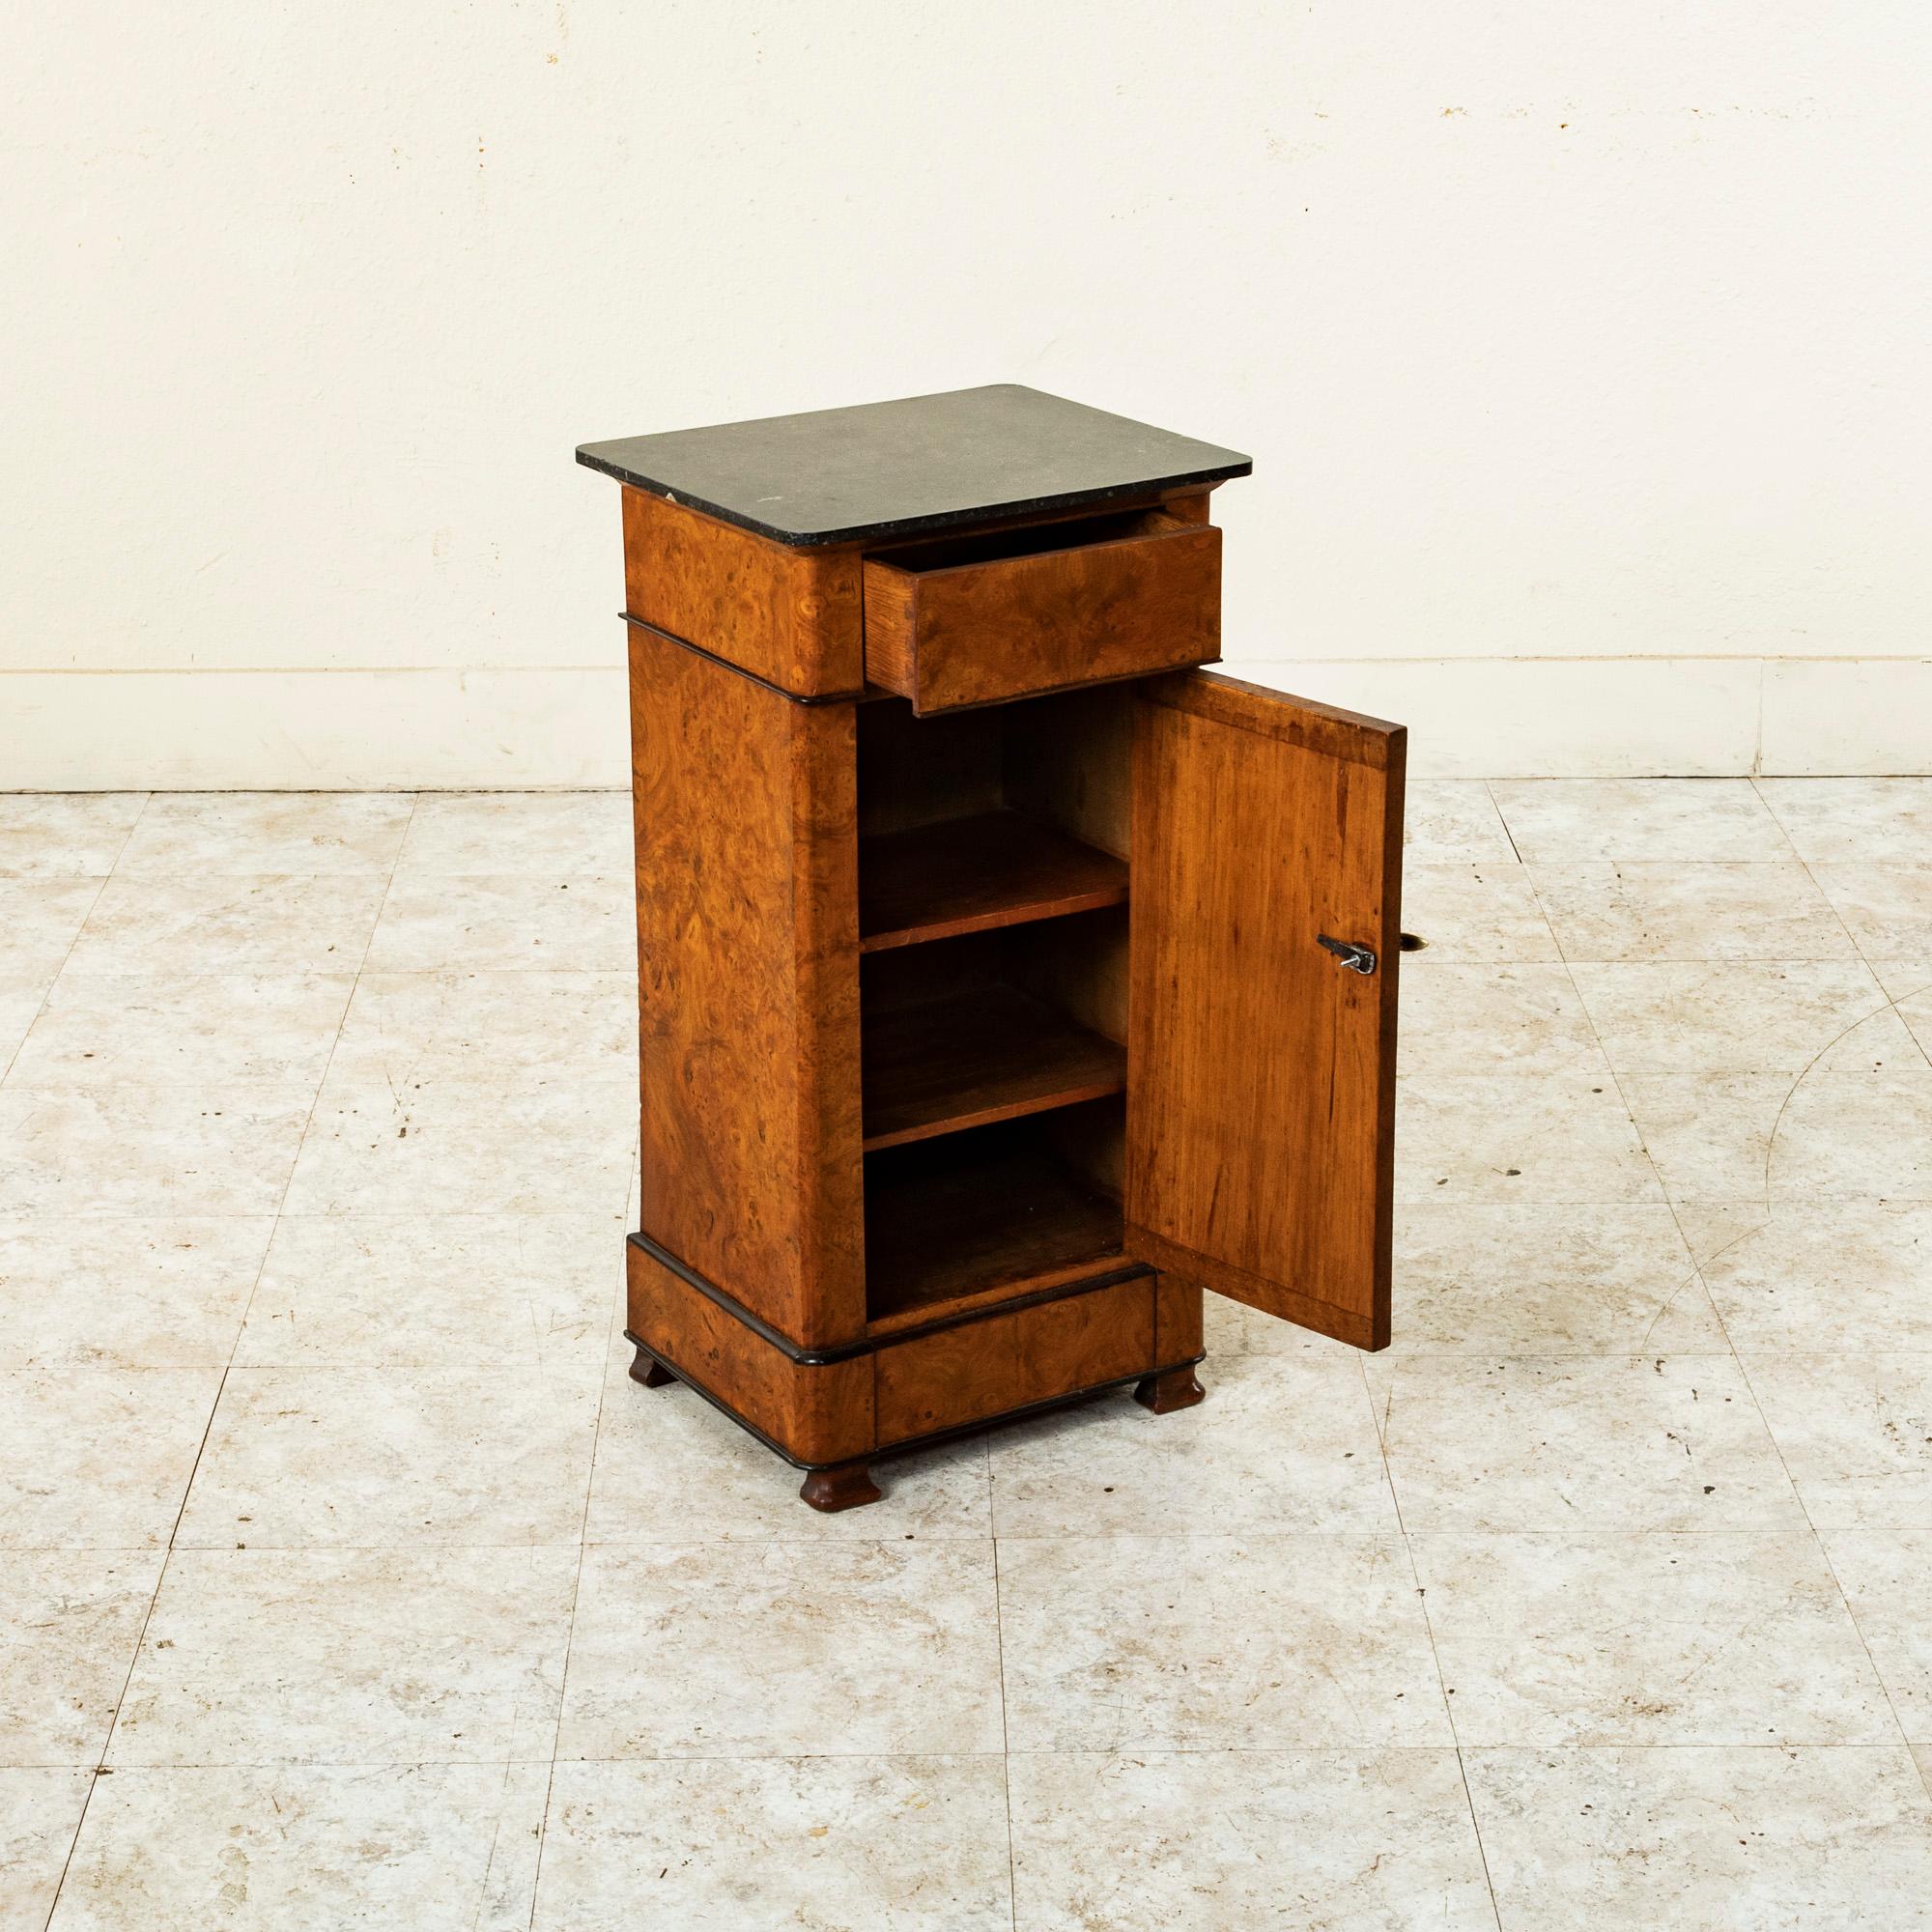 Early 19th Century French Restauration Period Burl Ash Nightstand or Side Table For Sale 2